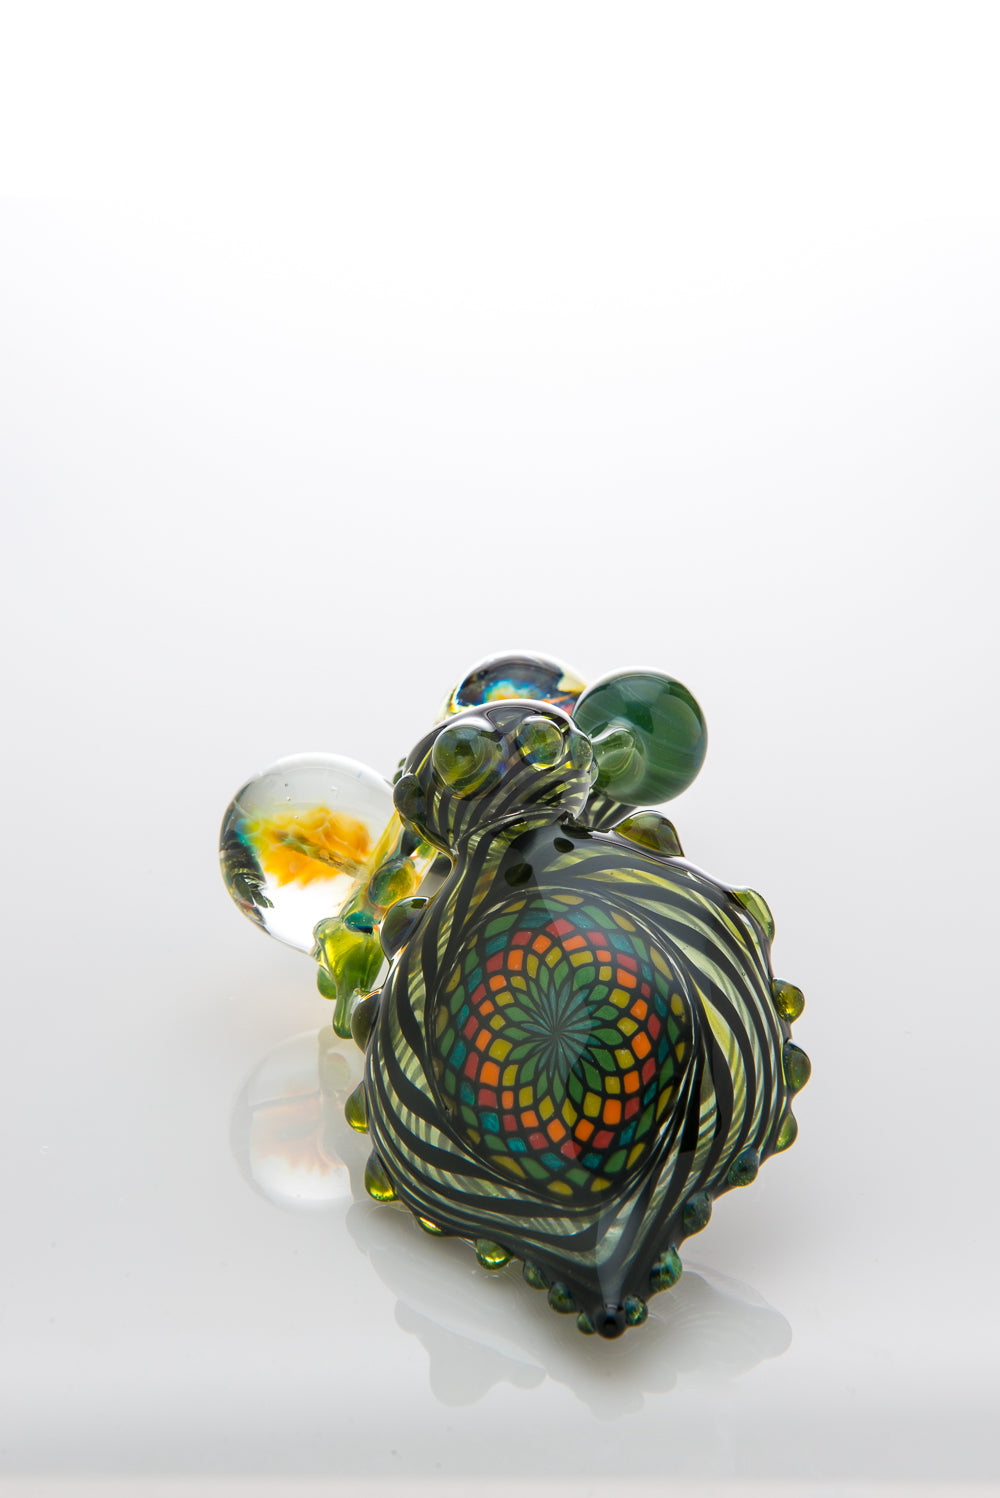 Fillacello Sherlock with Reversals and Marbles by WJC